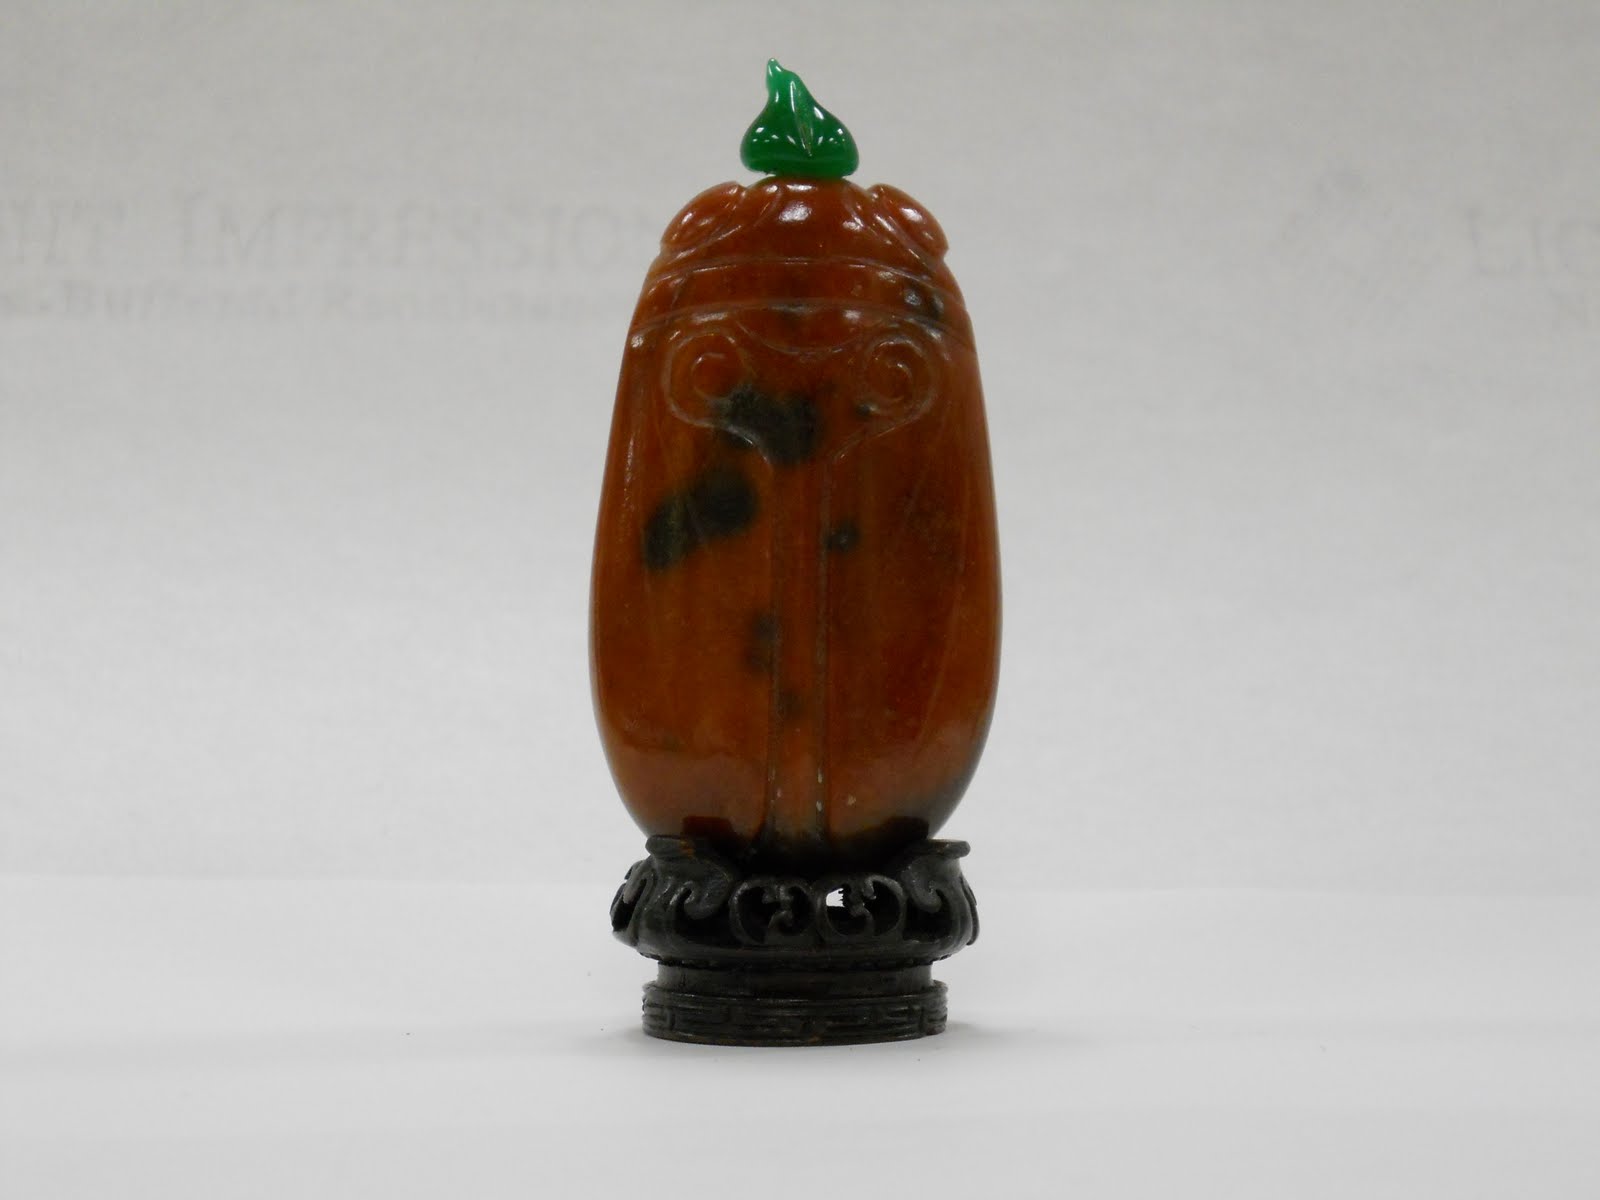 Chinese snuff bottle in the shape of a cicada with an amber body and an assymetrical jade green cap